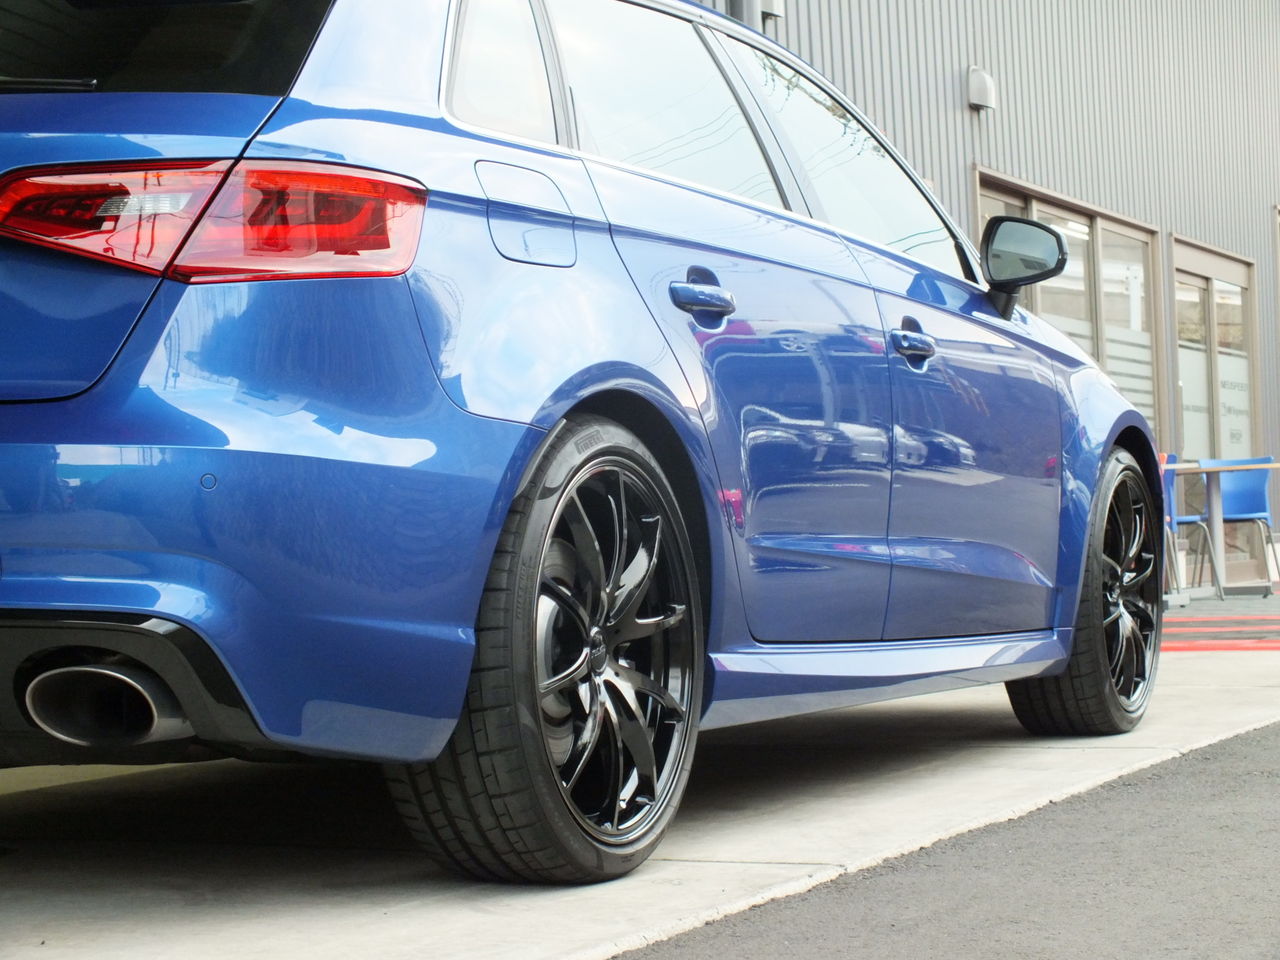 Audi RS3 looking for something different.